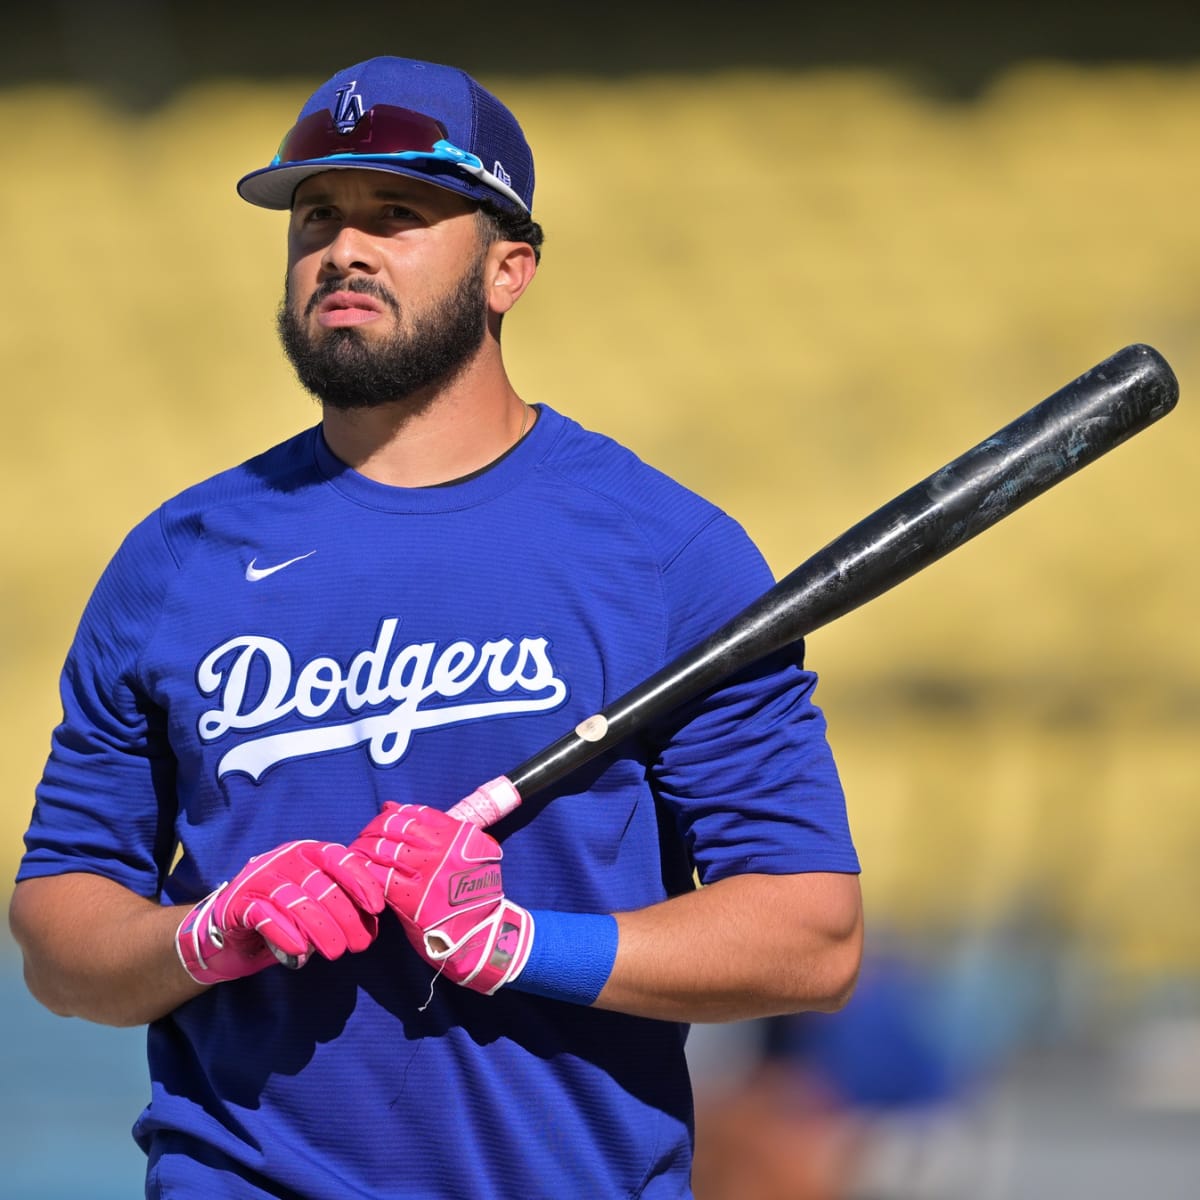 Dodger Blue - Page 620 of 2014 - Los Angeles Dodgers News, Rumors and More